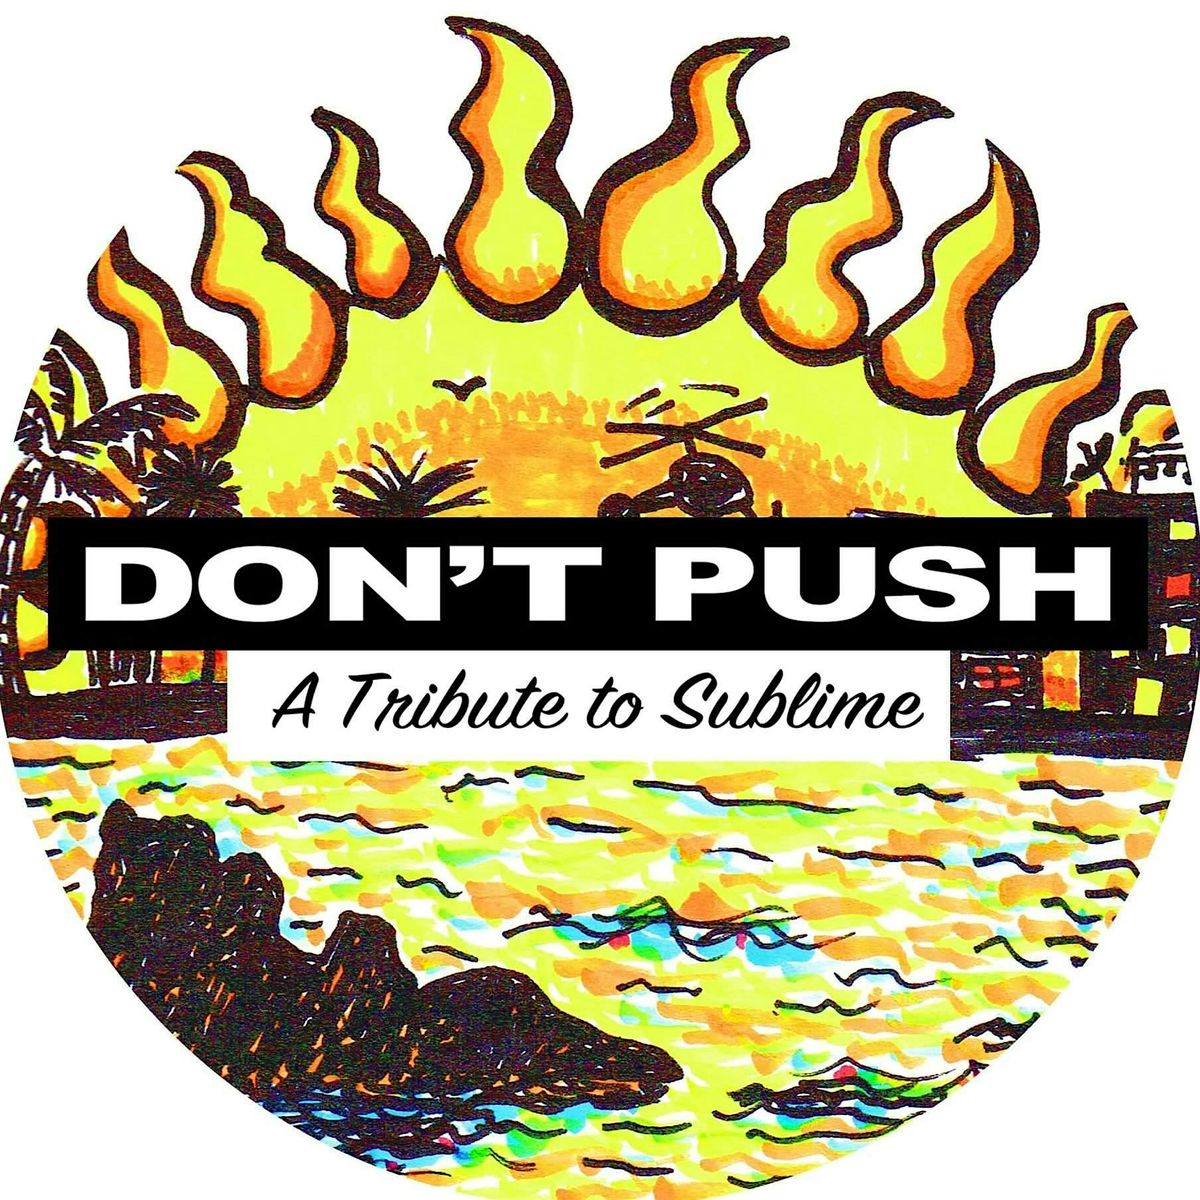 Sublime Tribute by Don't Push (SATURDAY SHOW)